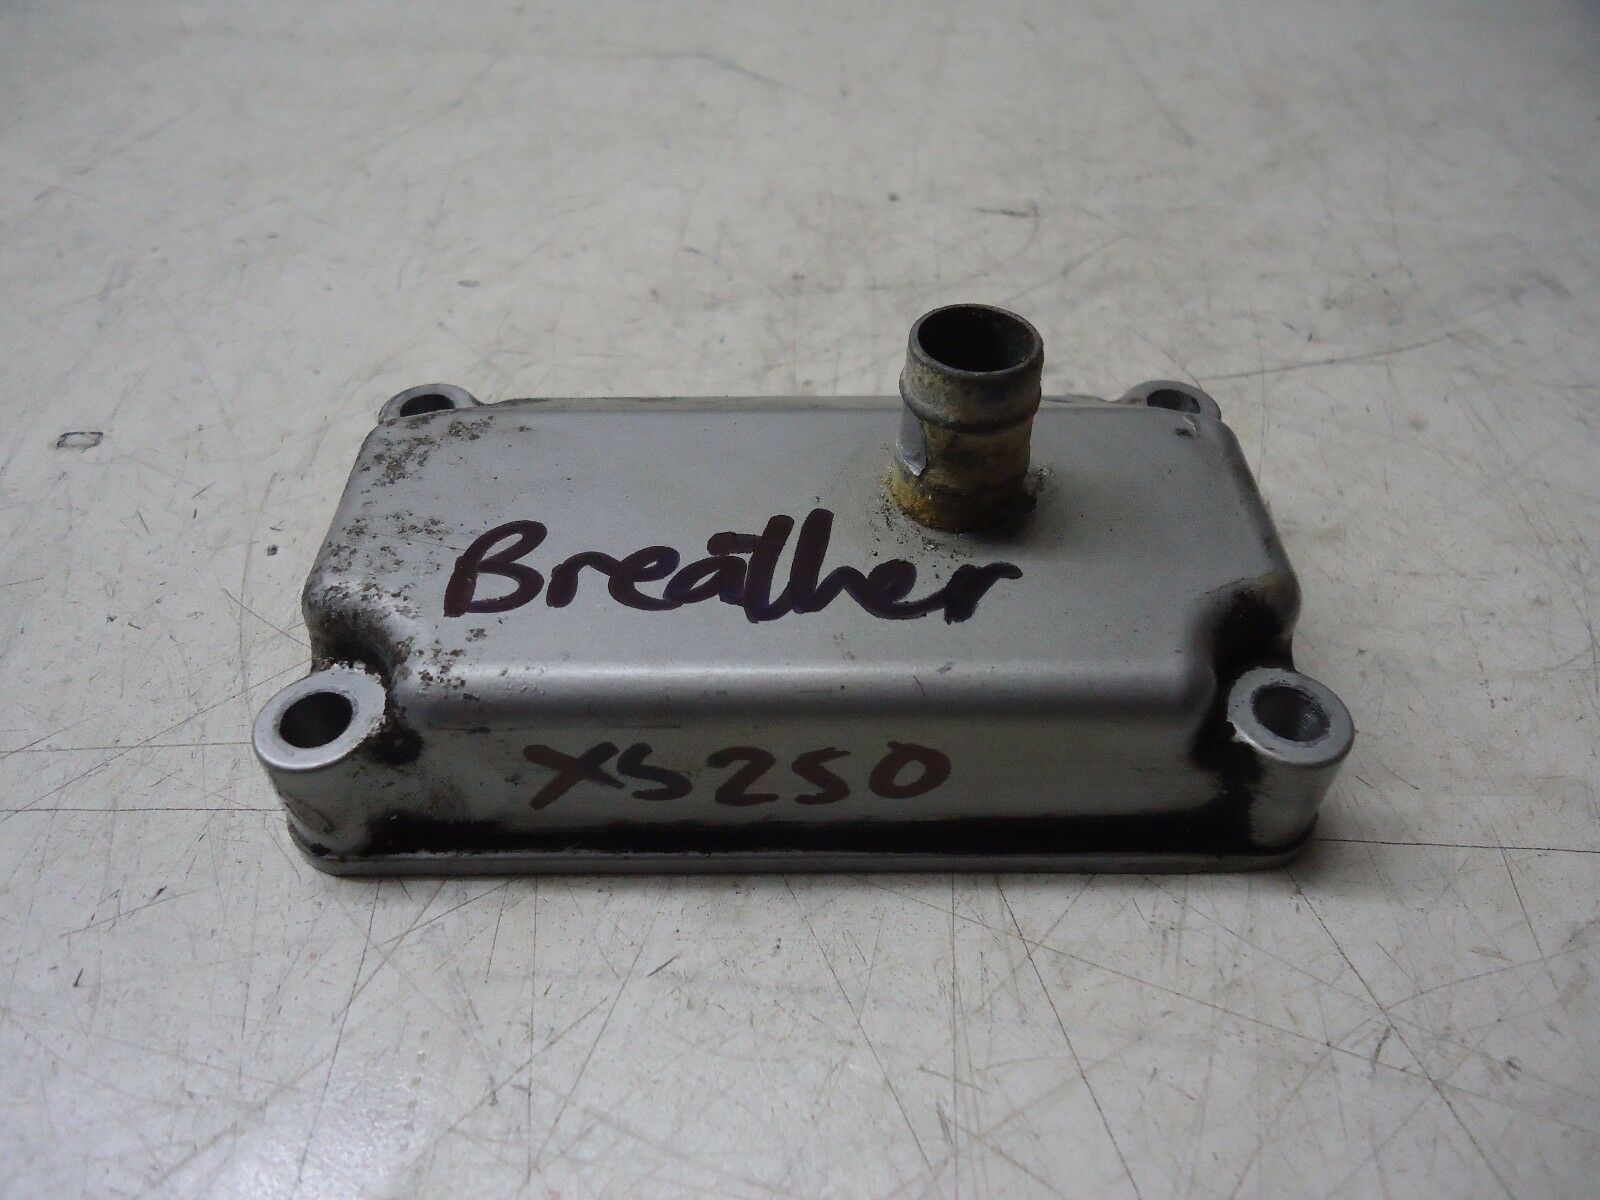 Yamaha XS250 Breather XS250 Engine Breather Cover